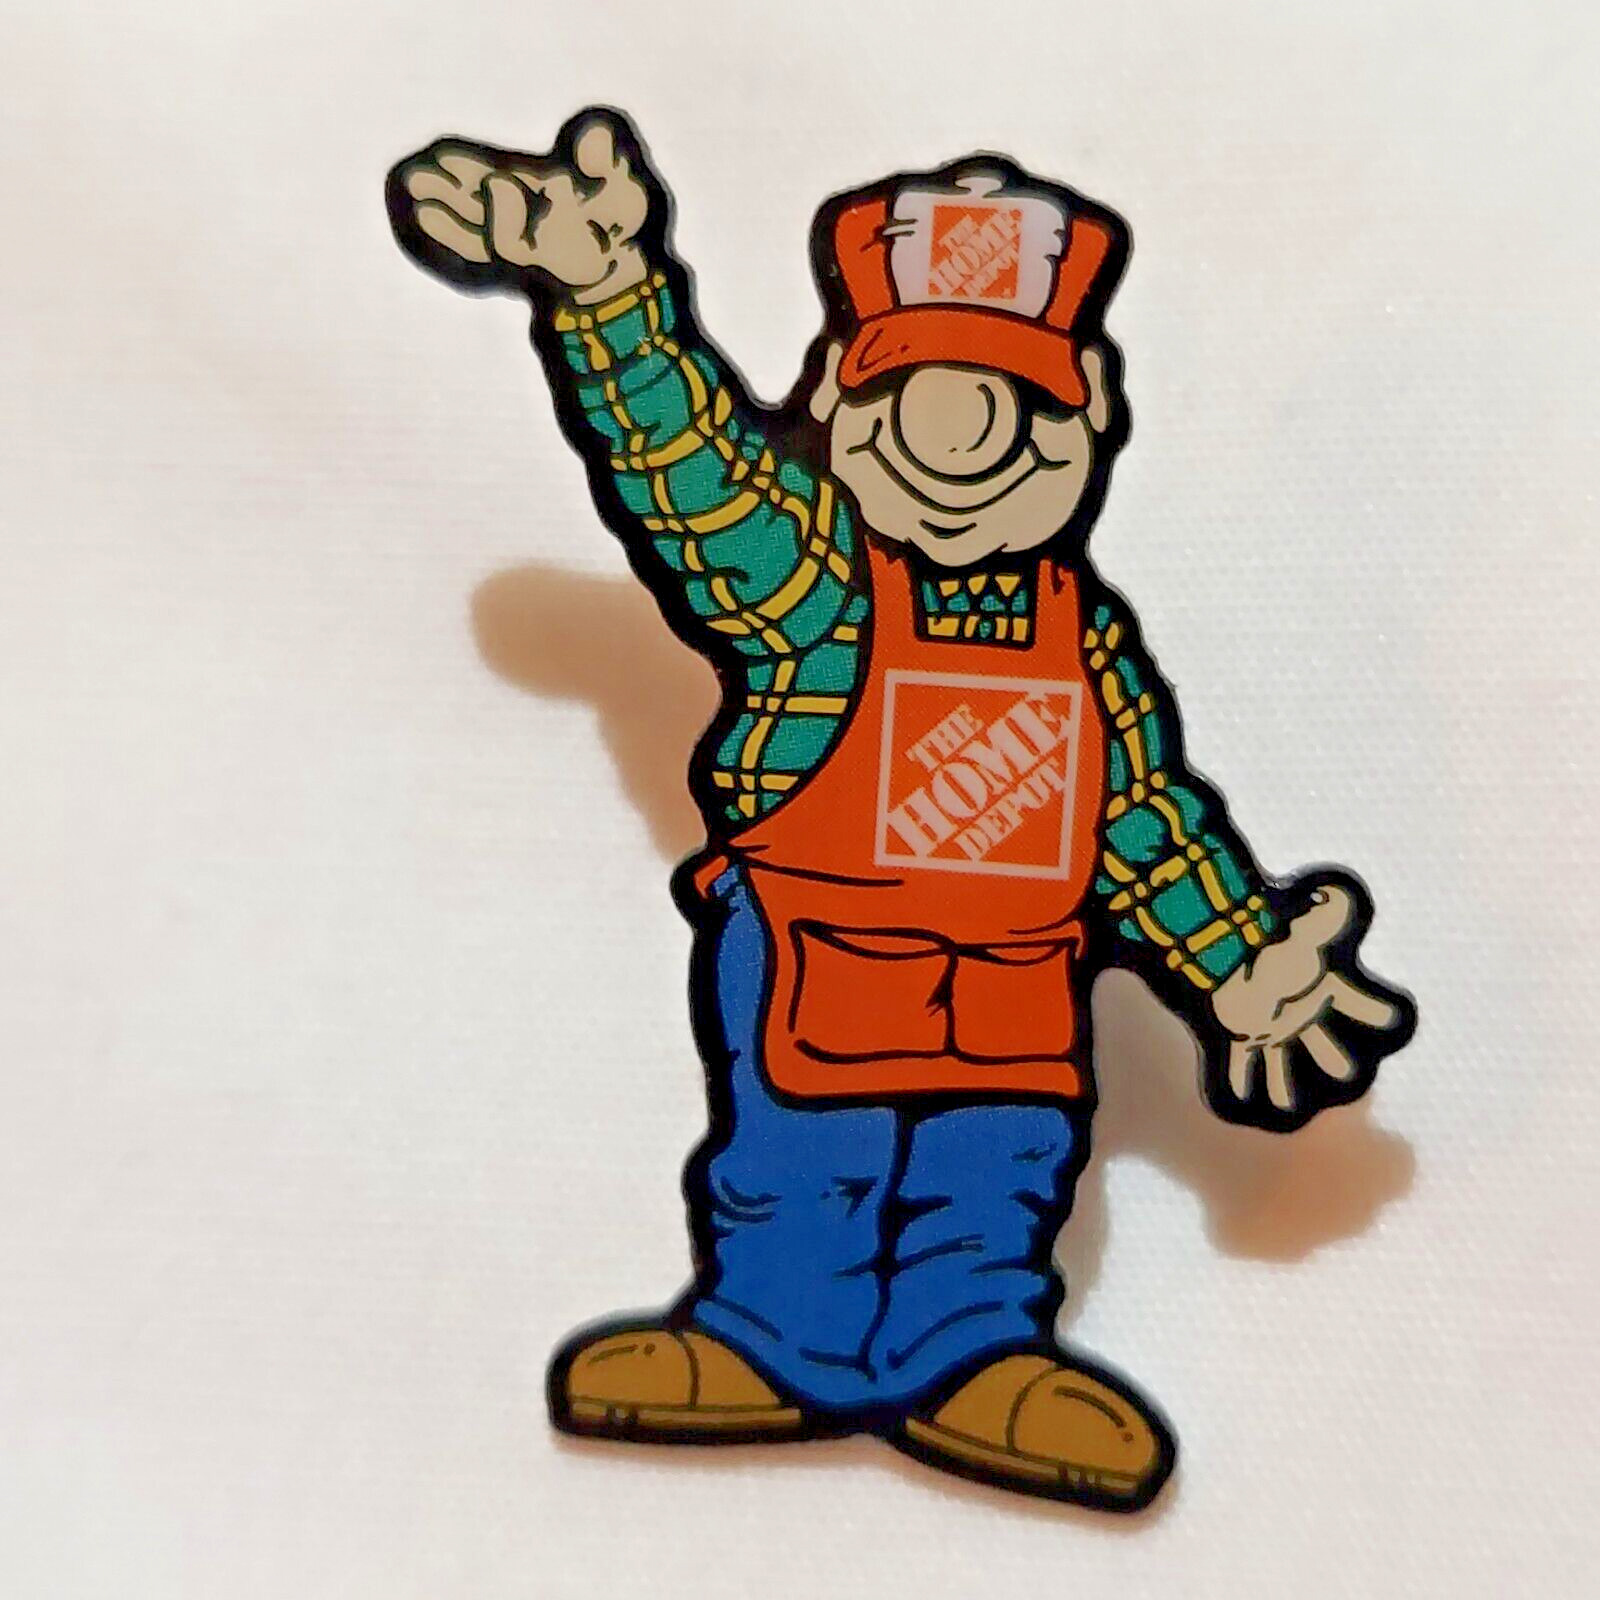 Home Depot HOMER D POE Lapel Pin Hat Jacket Apron Hello Welcome Waving Open Arms